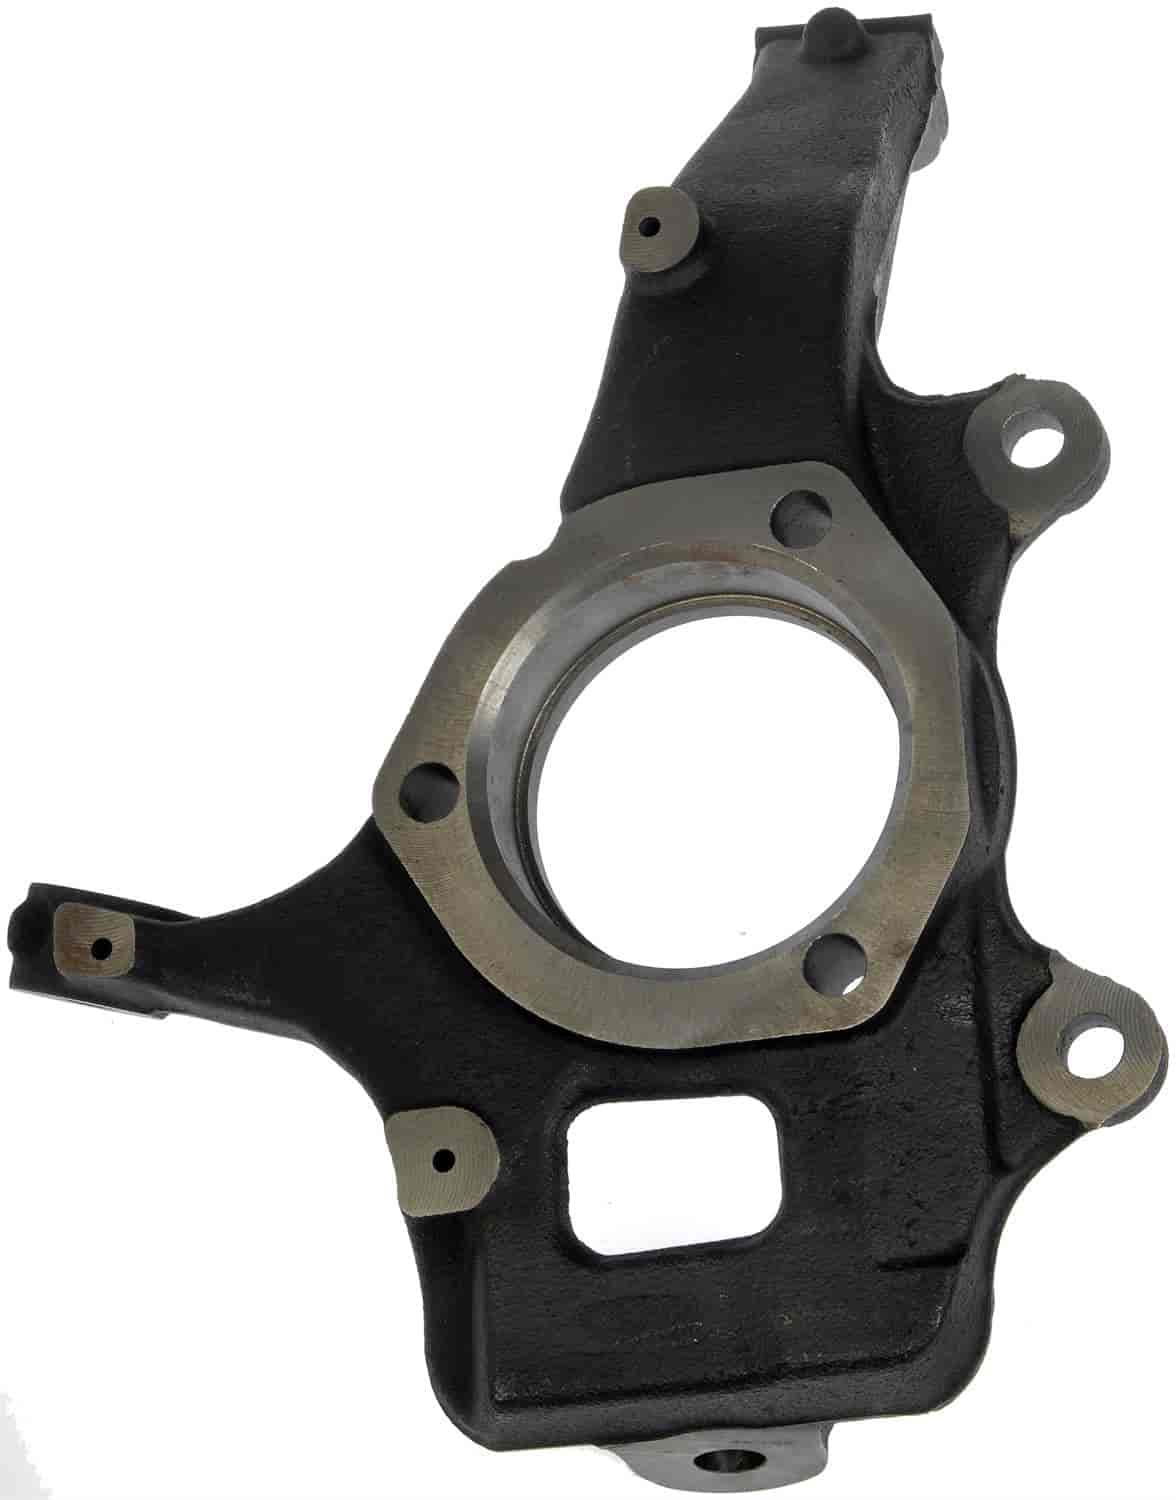 Steering Knuckle 1997-2004 Ford F-150, Navigator, Expedition 4WD